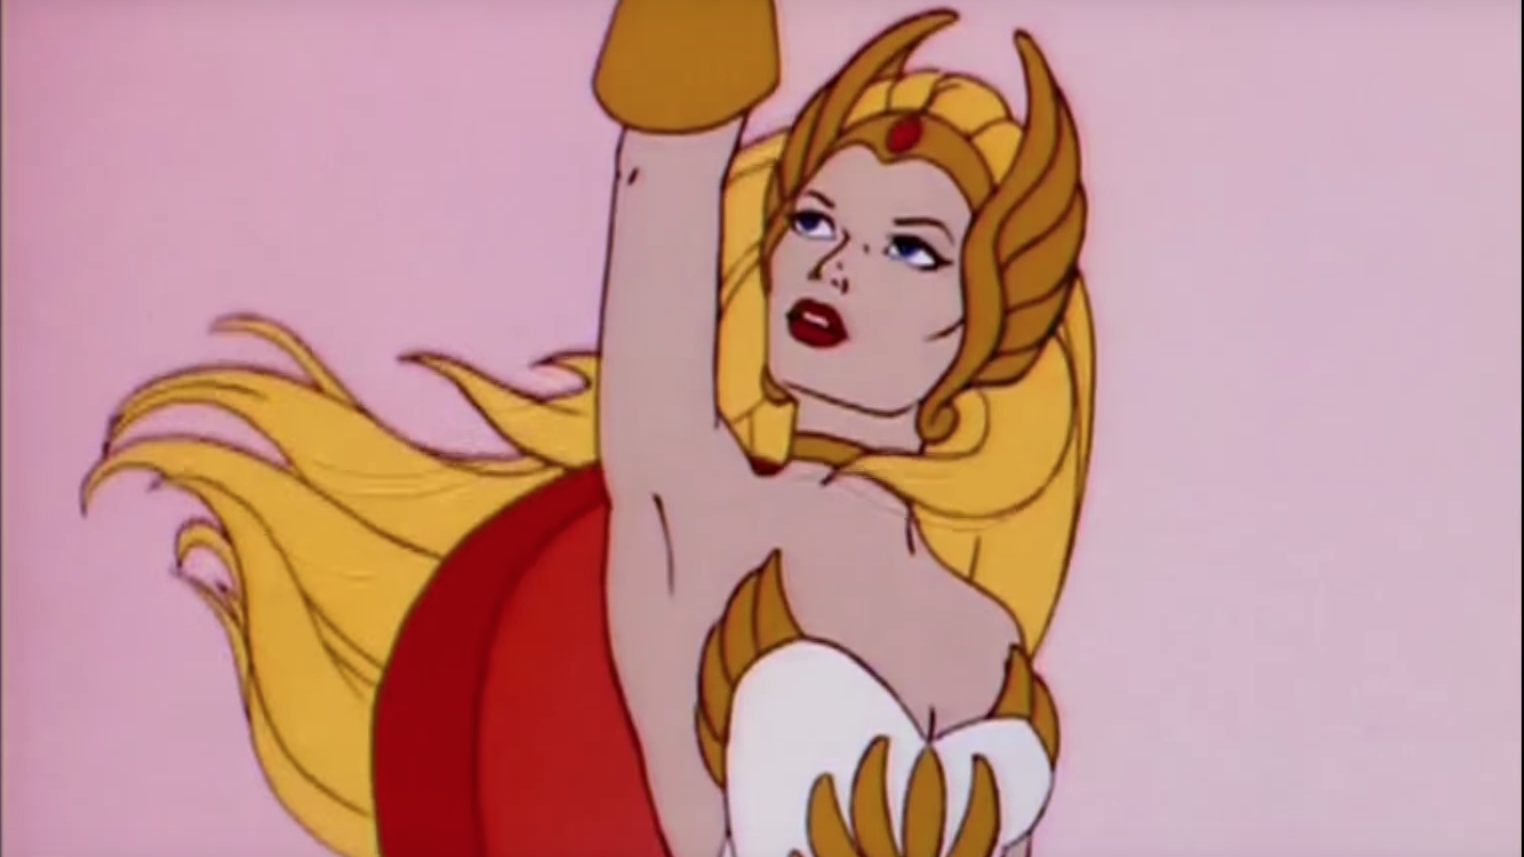 She-Ra</a><br> by <a href='/profile/Bling-King/'>Bling King</a>